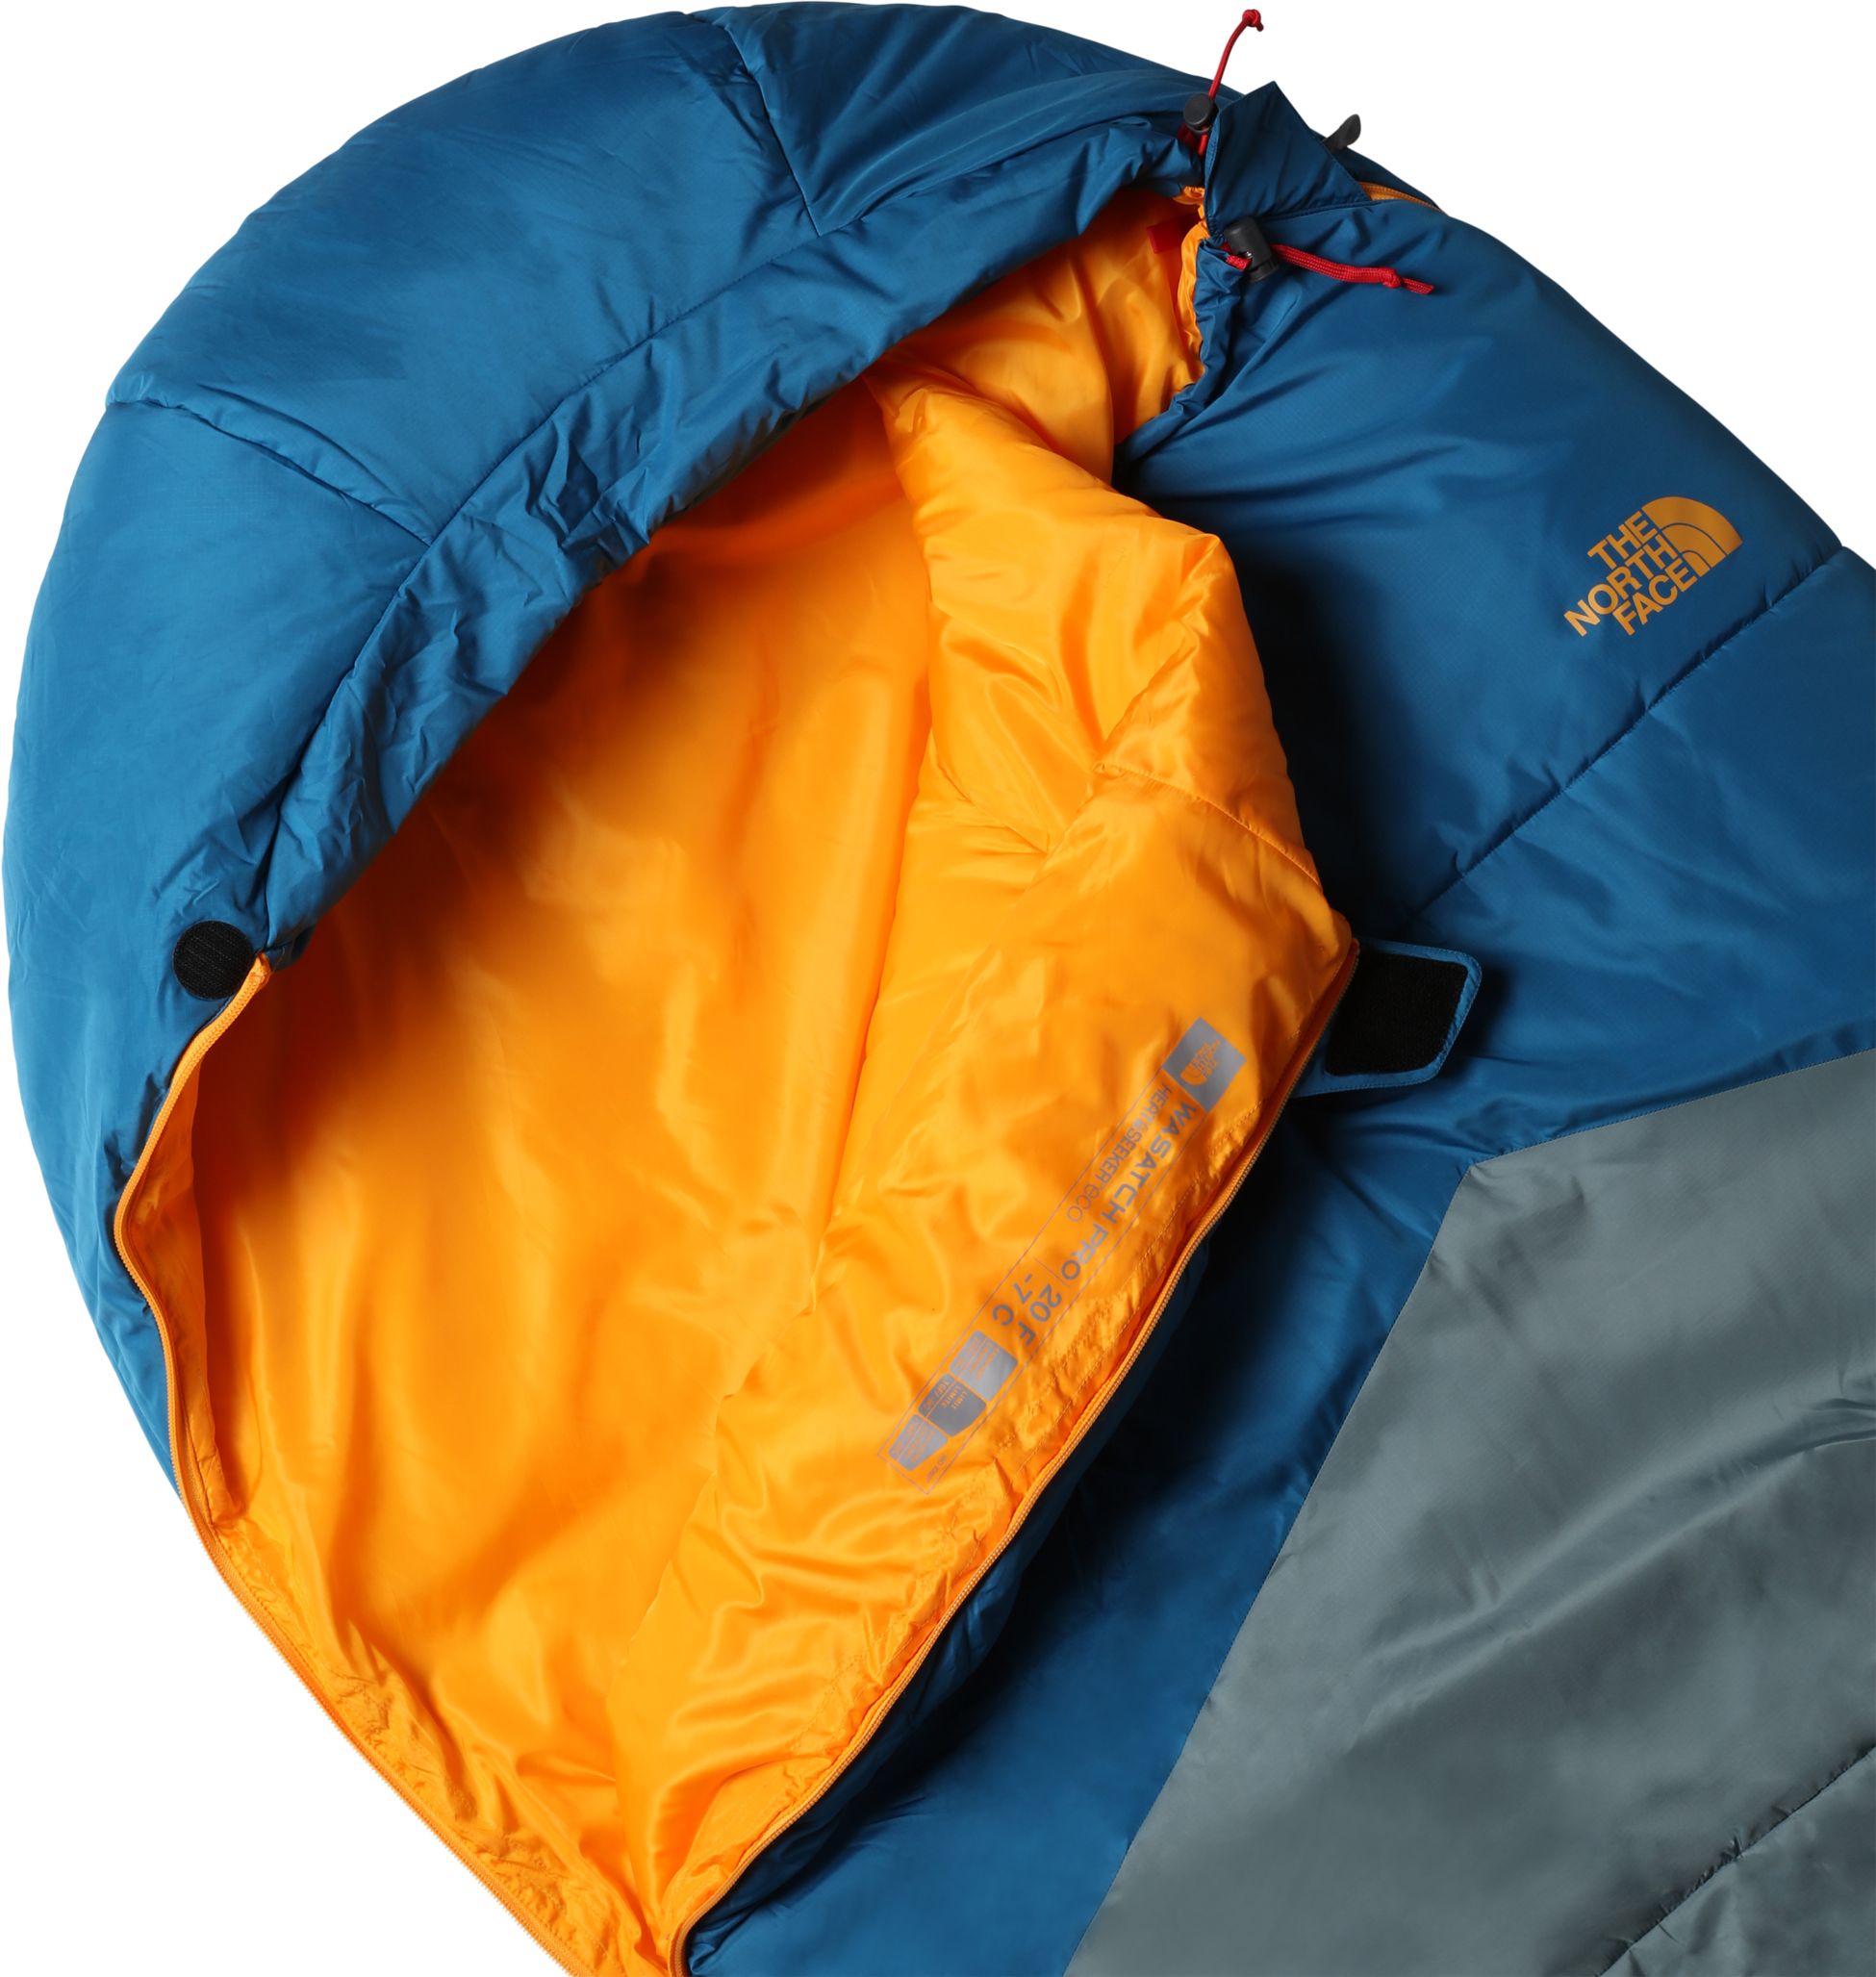 THE NORTH FACE, WASATCH PRO 20